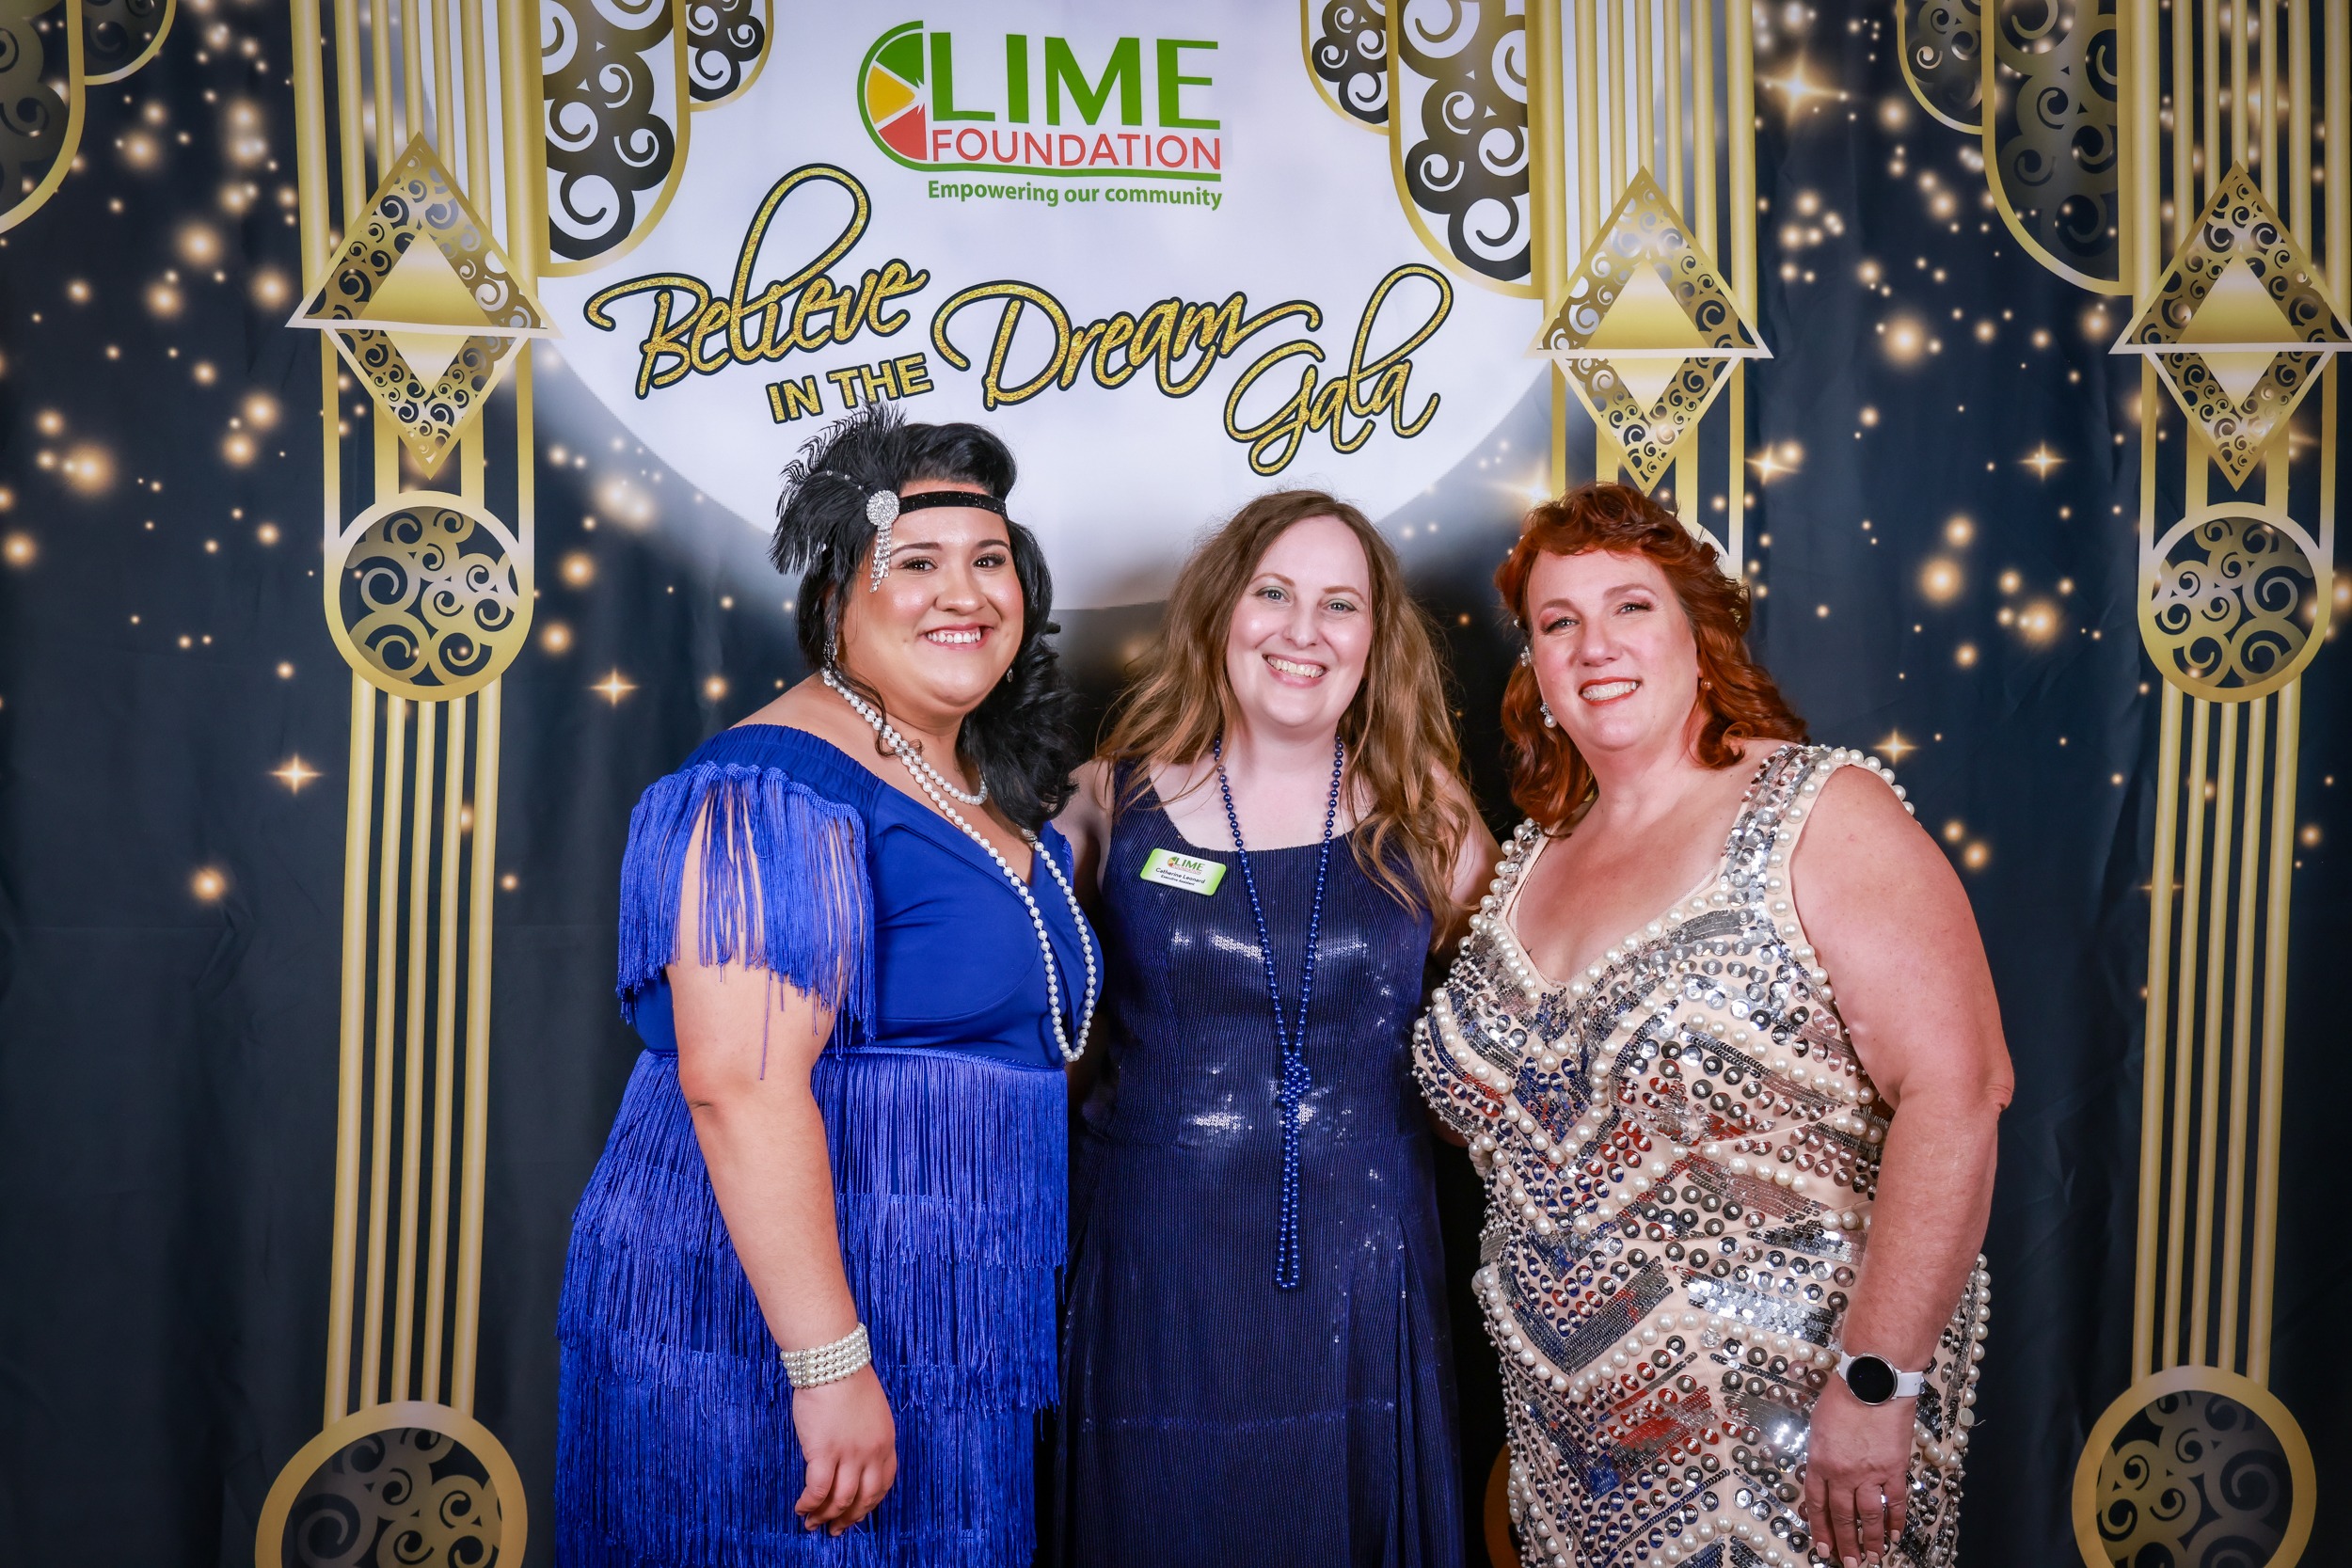 Three women posing for a photo at a 1920's themed event hosted by a Sonoma County Non-Profit.